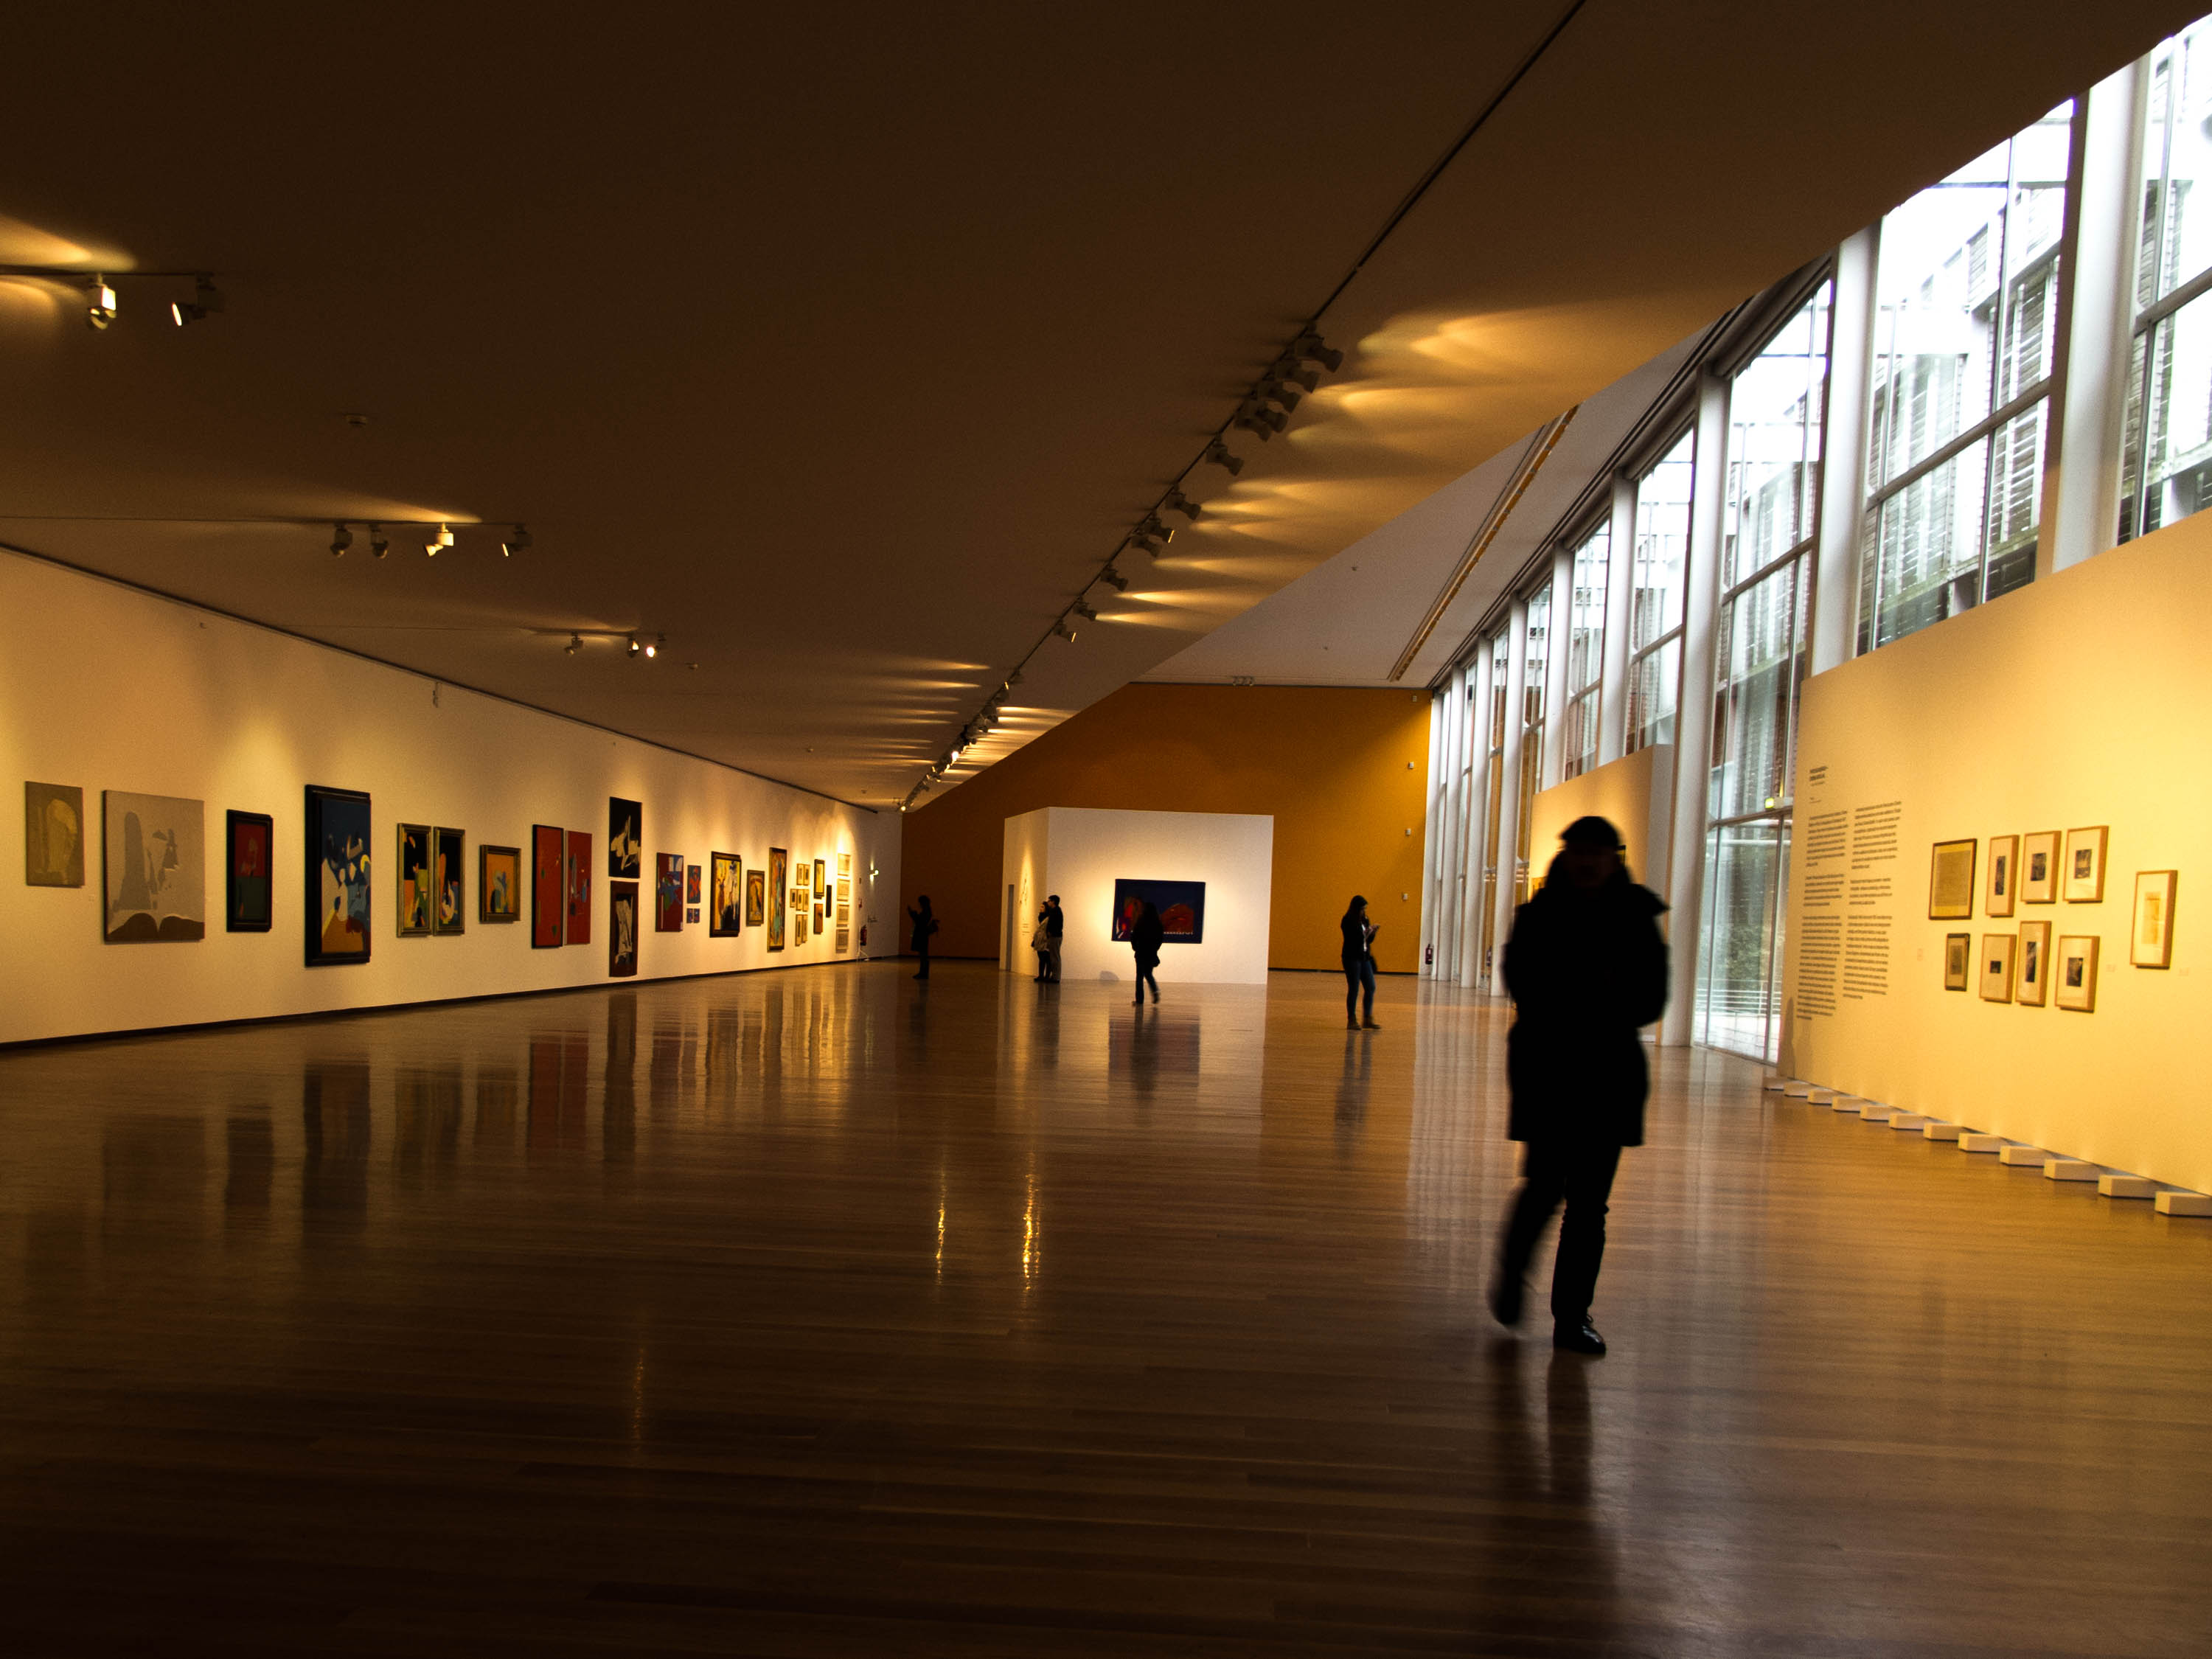 The inside of the municipal art gallery